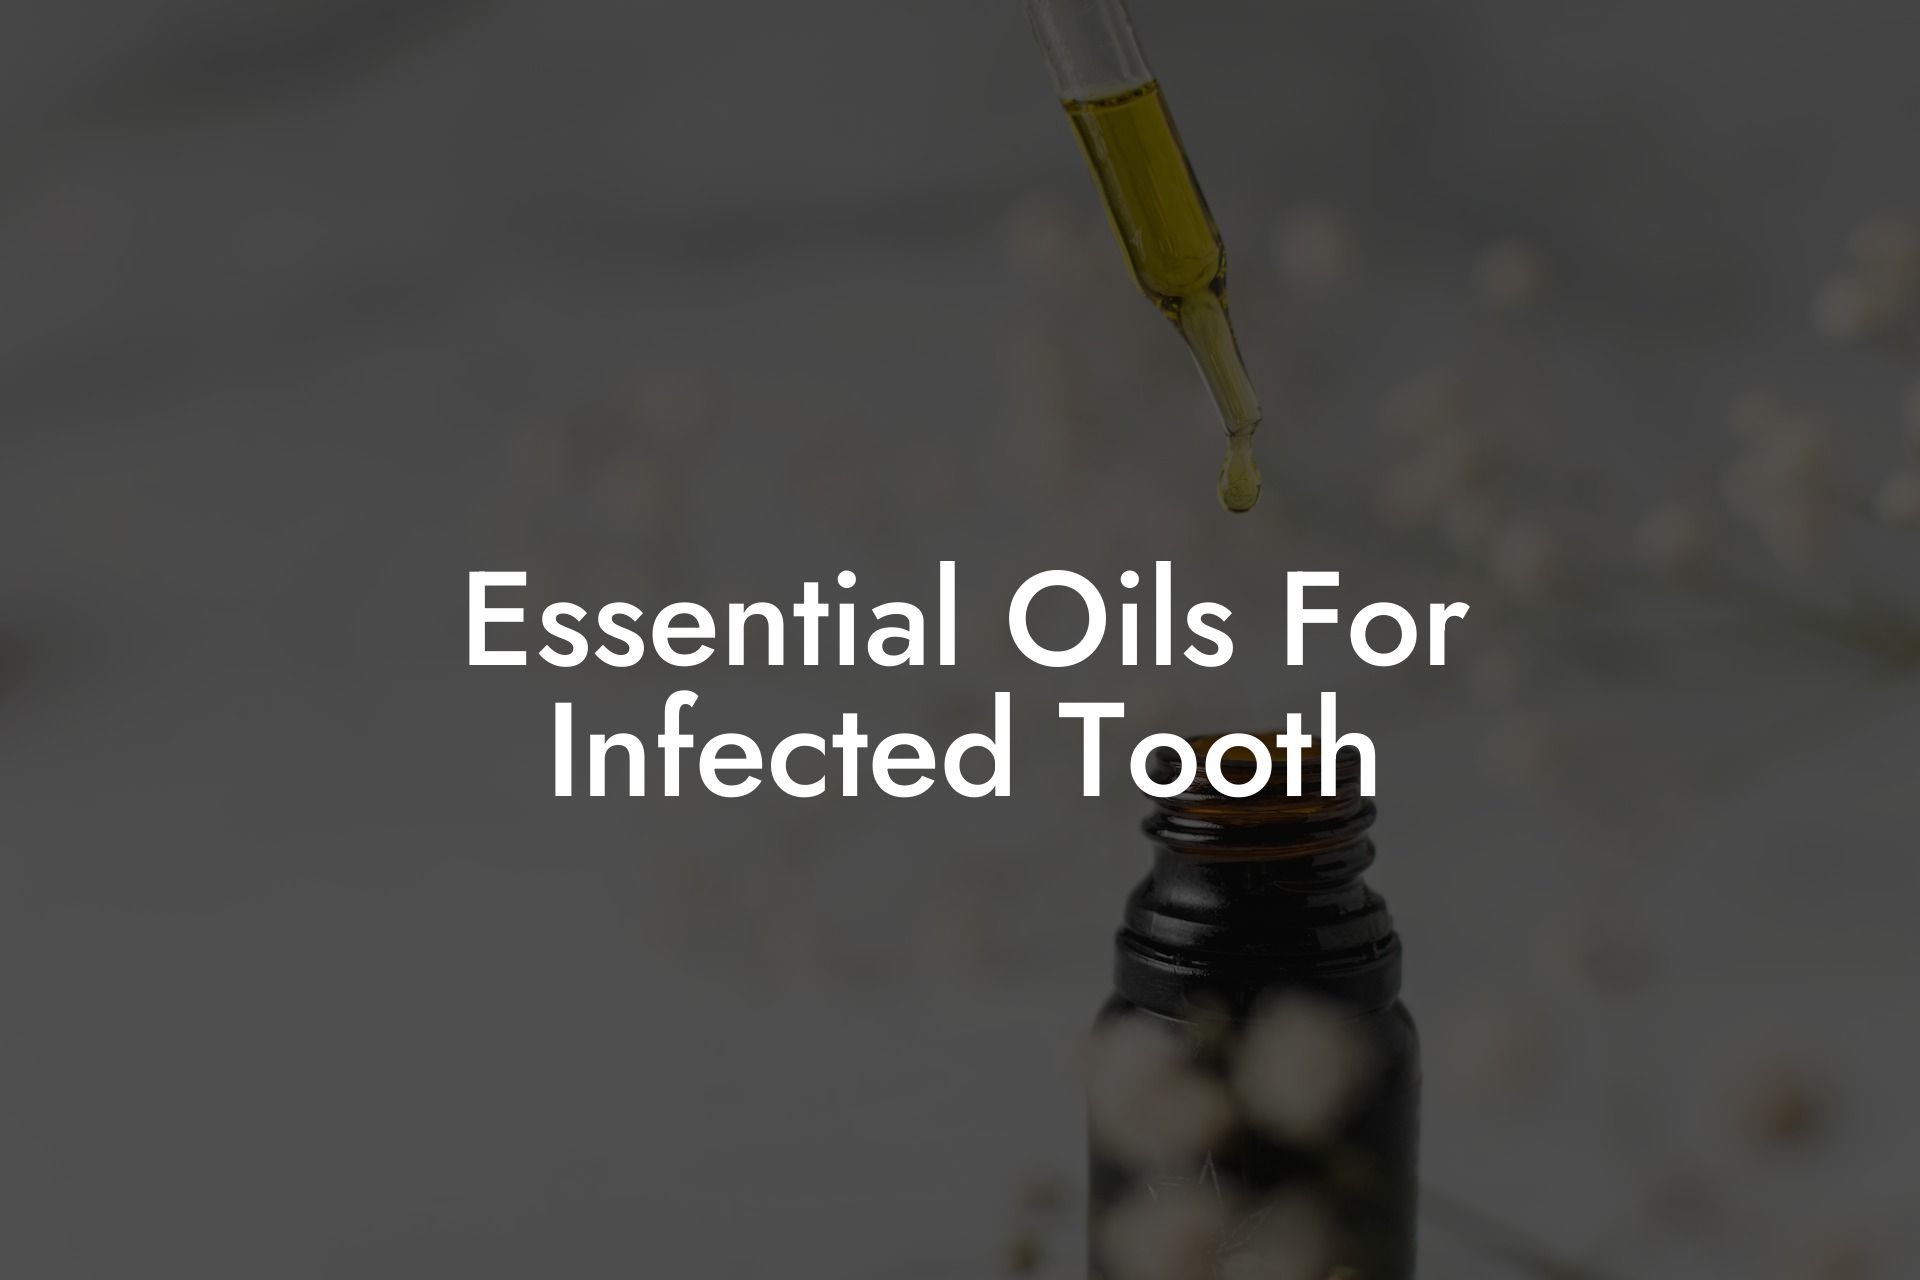 Essential Oils For Infected Tooth